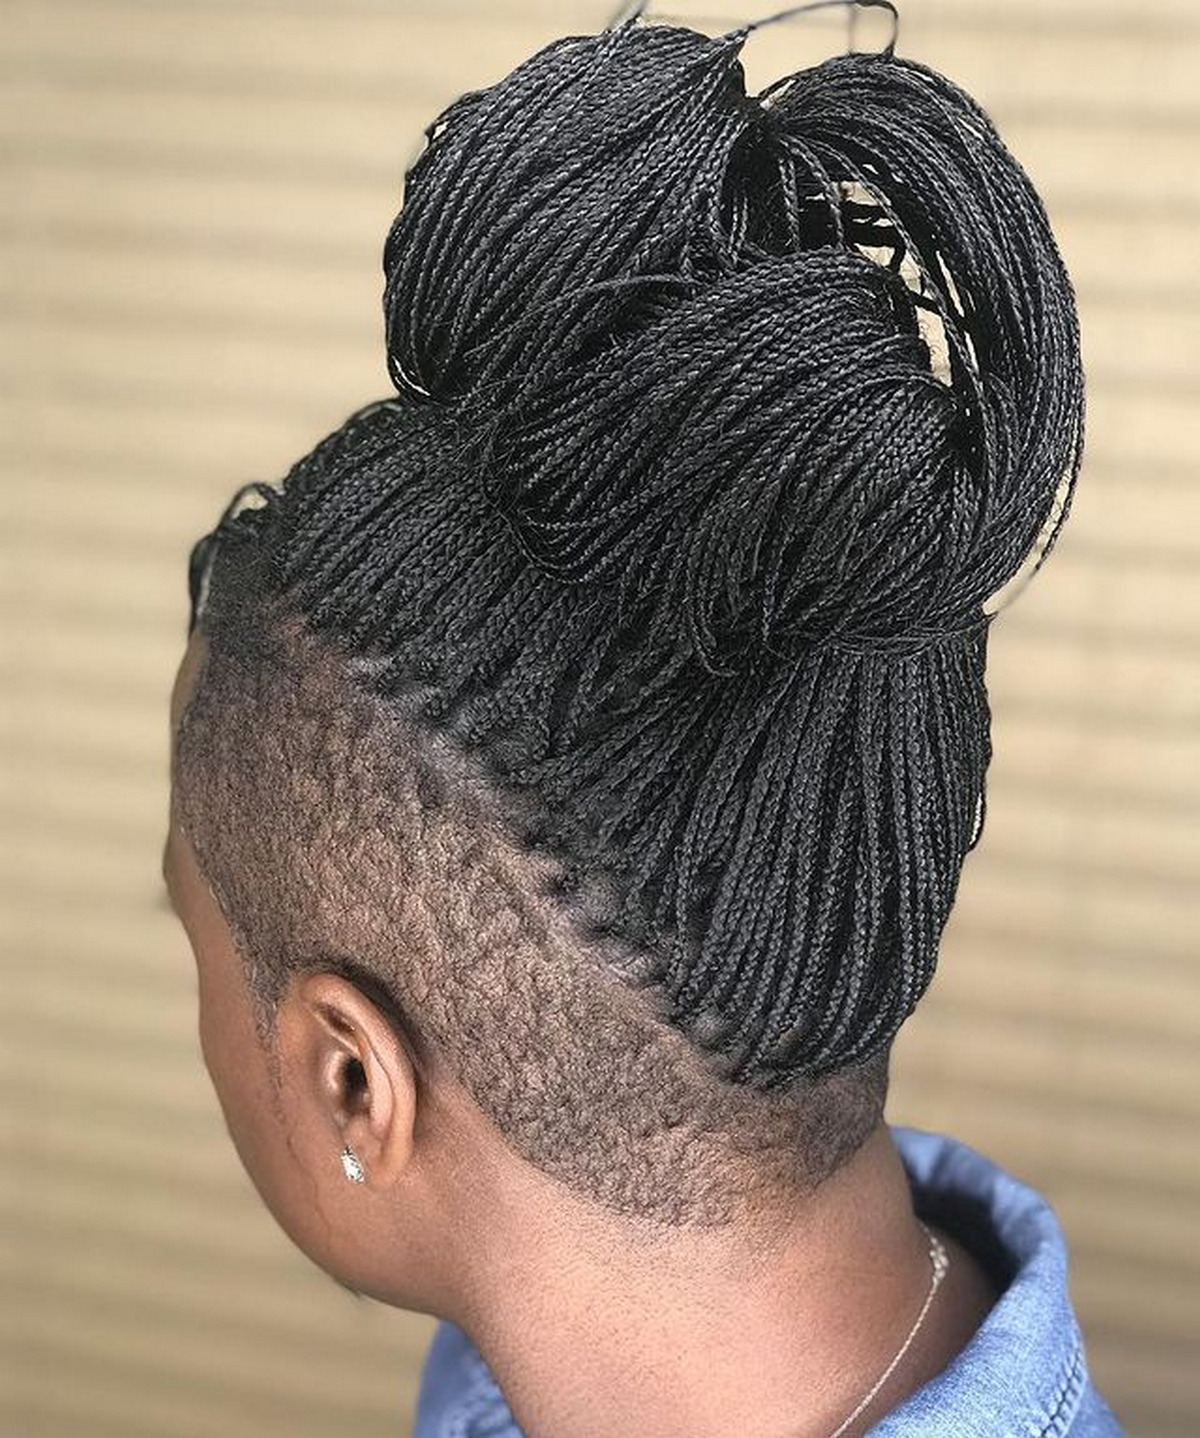 Knotted Braids With Shaved Sides And Back